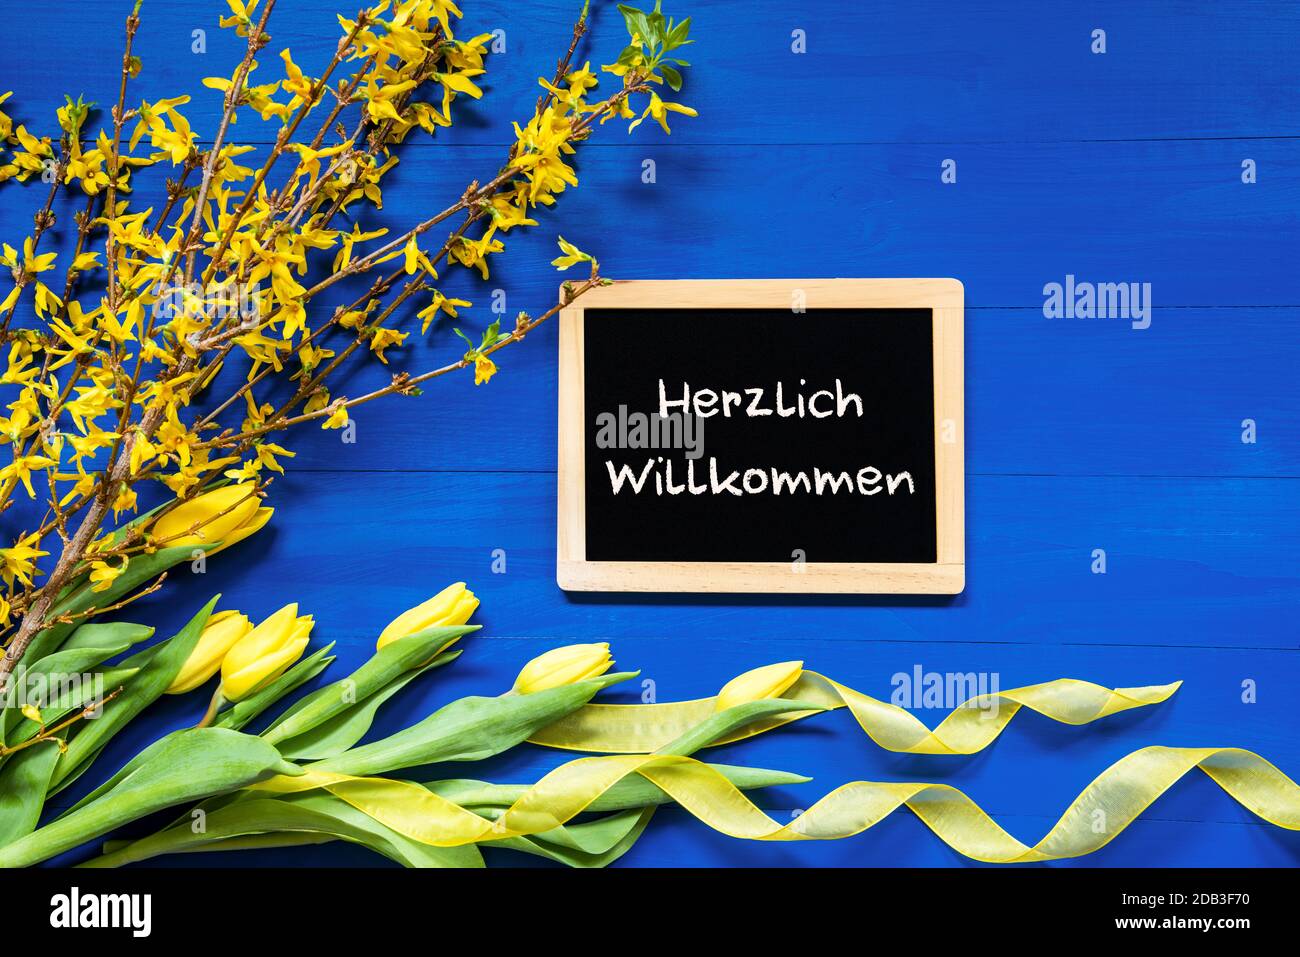 Blackboard With German Text Herzlich Willkommen Means Welcome. Yellow Spring Flowers Like Tulip And Branches. Festive Decoration With Ribbon. Blue Woo Stock Photo